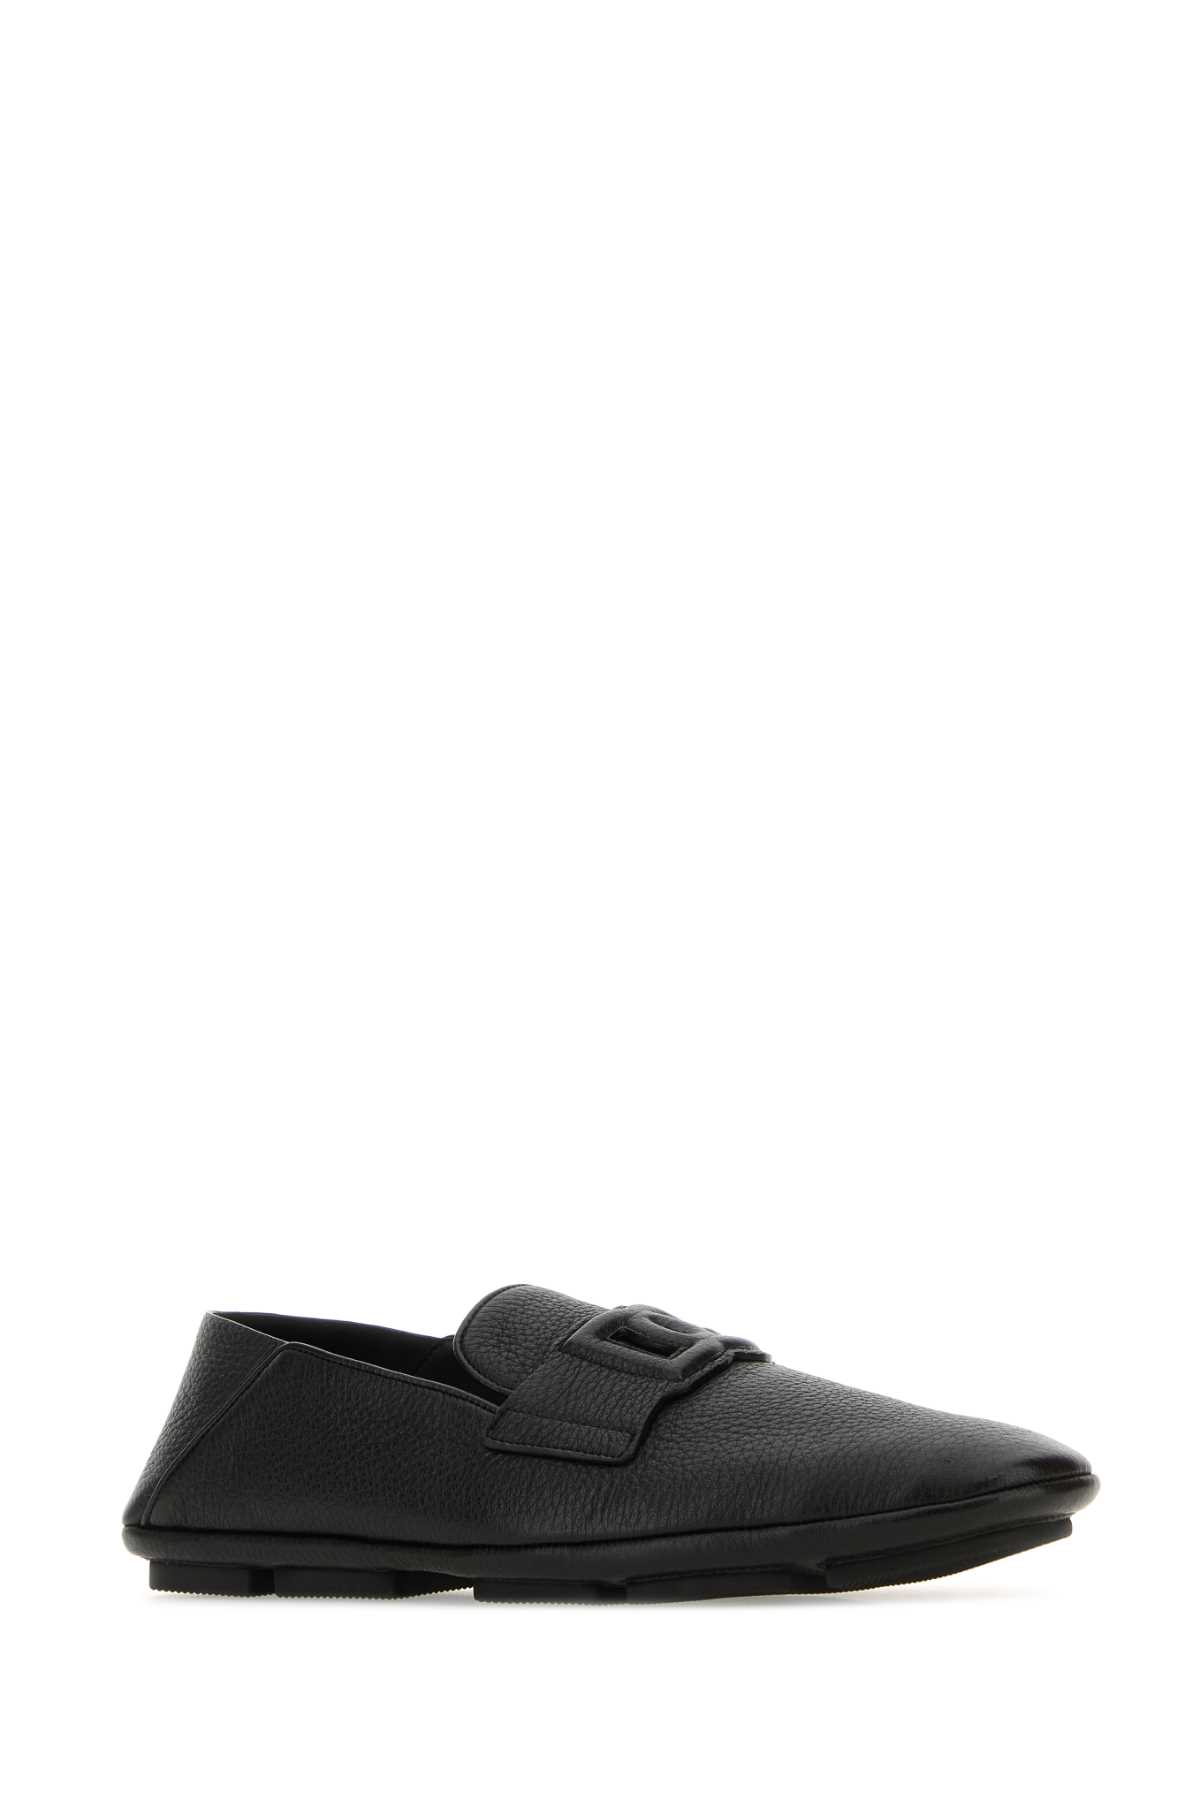 Dolce & Gabbana Black Leather Driver Loafers In Nero